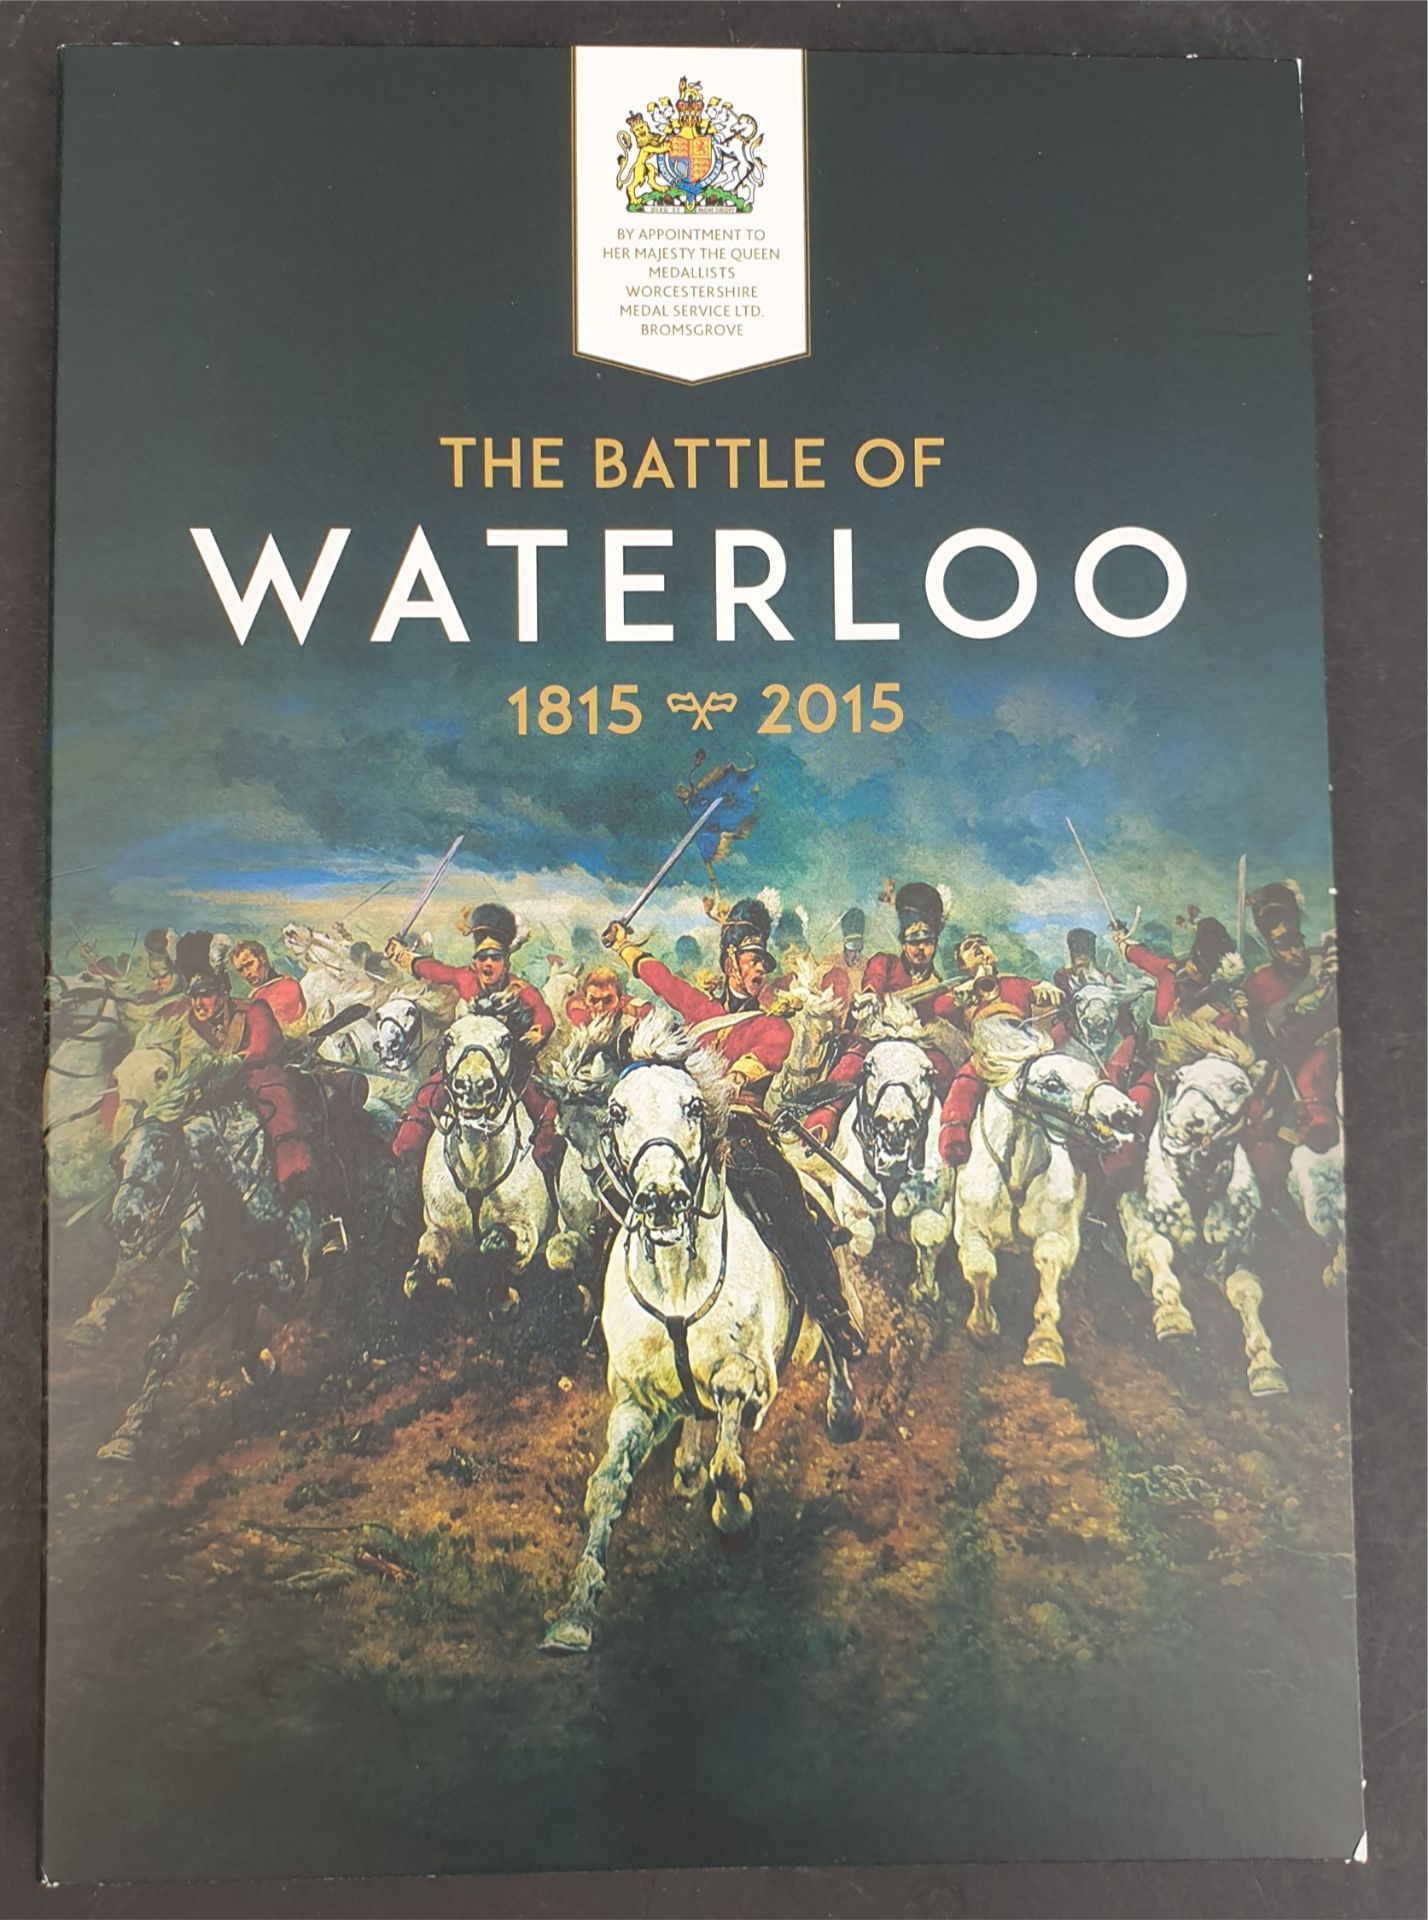 Collectable Coins Battle of Waterloo 1815 - 2015